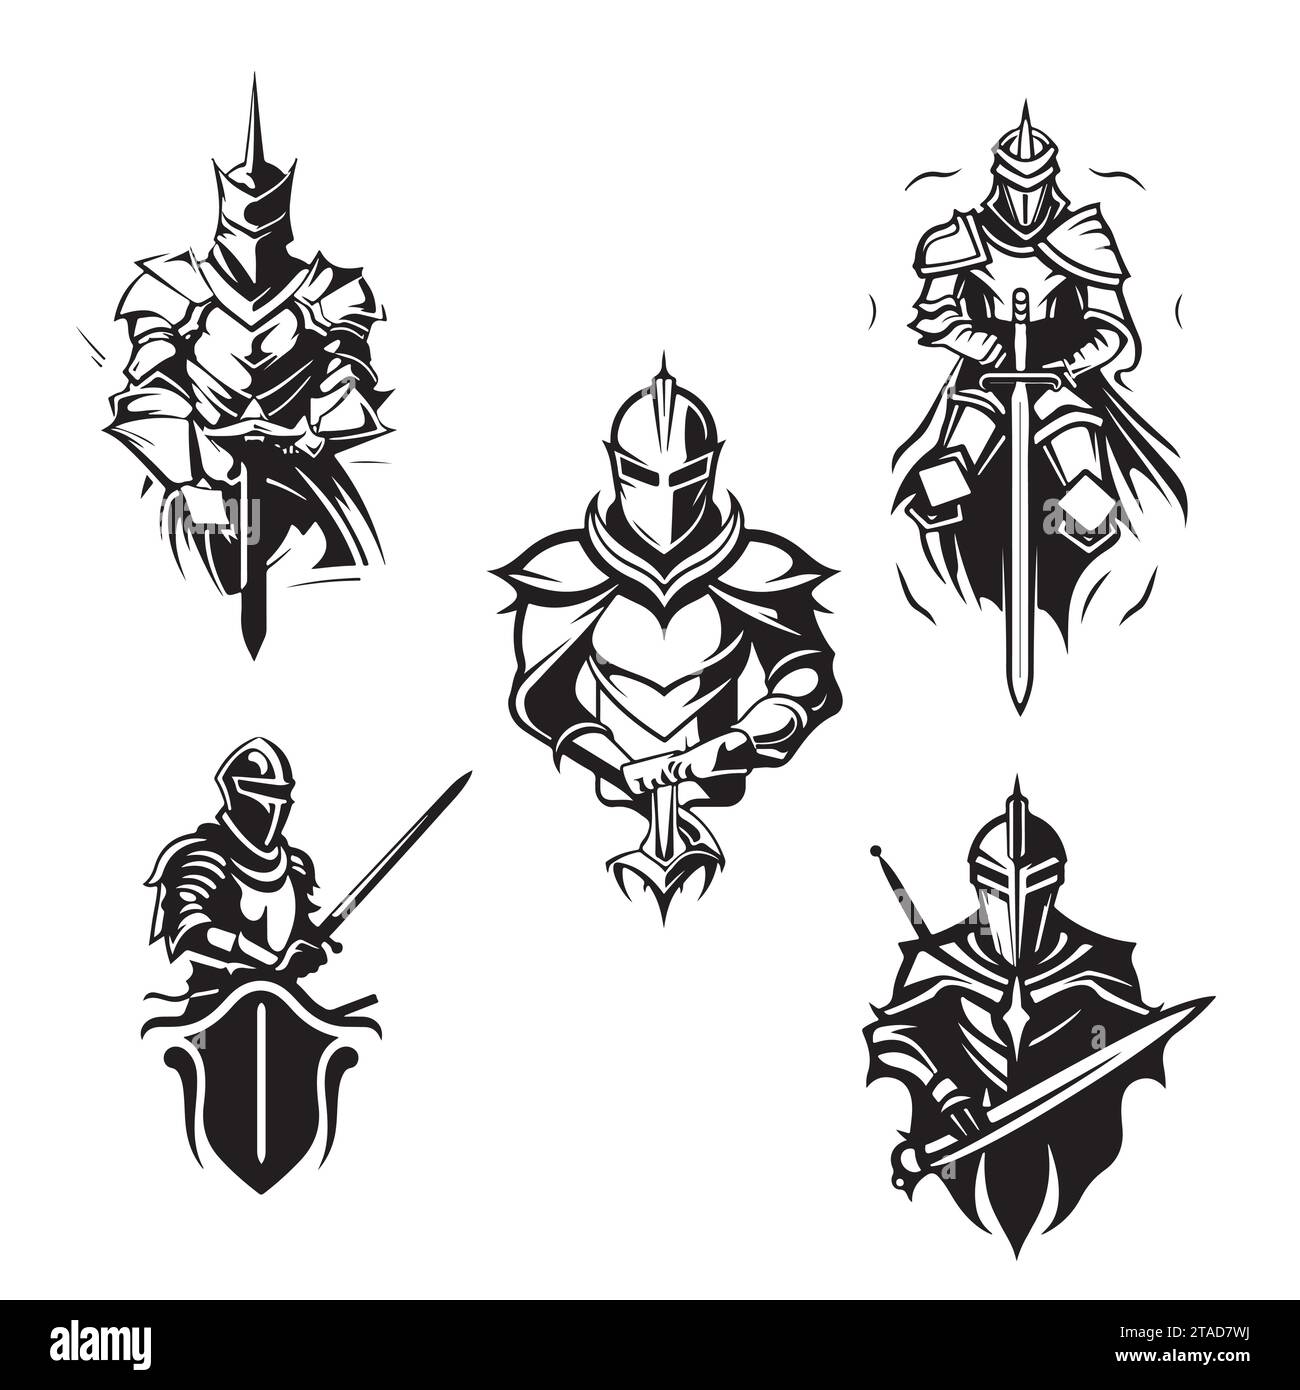 Set of monochrome knights emblems, badges, labels and logos medieval helmet, swords, mace, daggers shield antique vintage symbol , engraved hand drawn in sketch or wood cut style, old looking retro Stock Vector